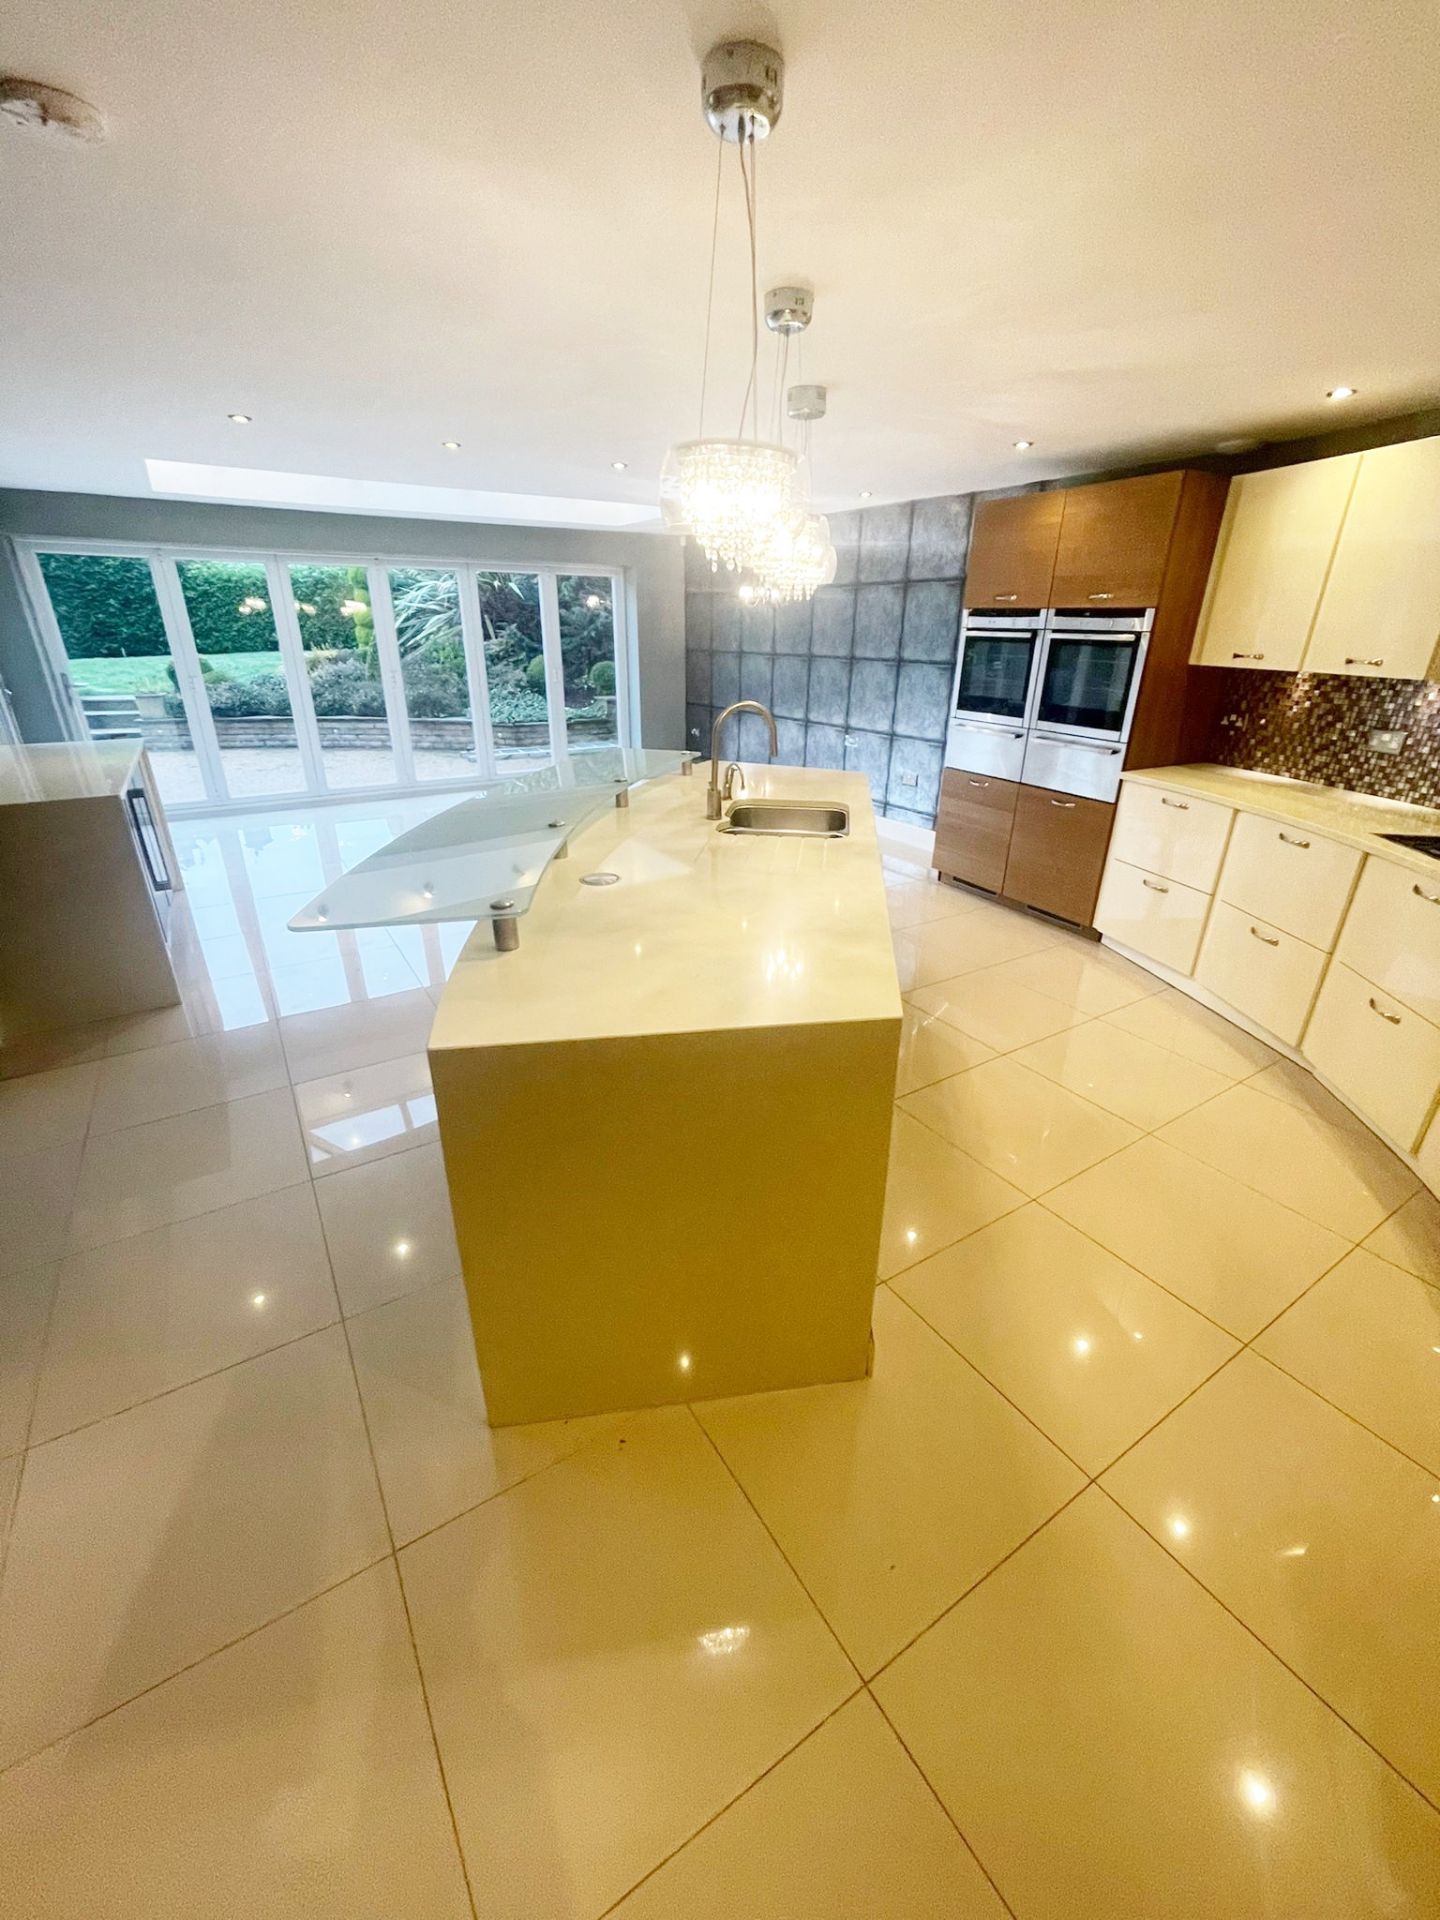 1 x Contemporary ALNO Fitted Kitchen With Branded  Appliances Created By Award Winning Kitchen - Image 39 of 89